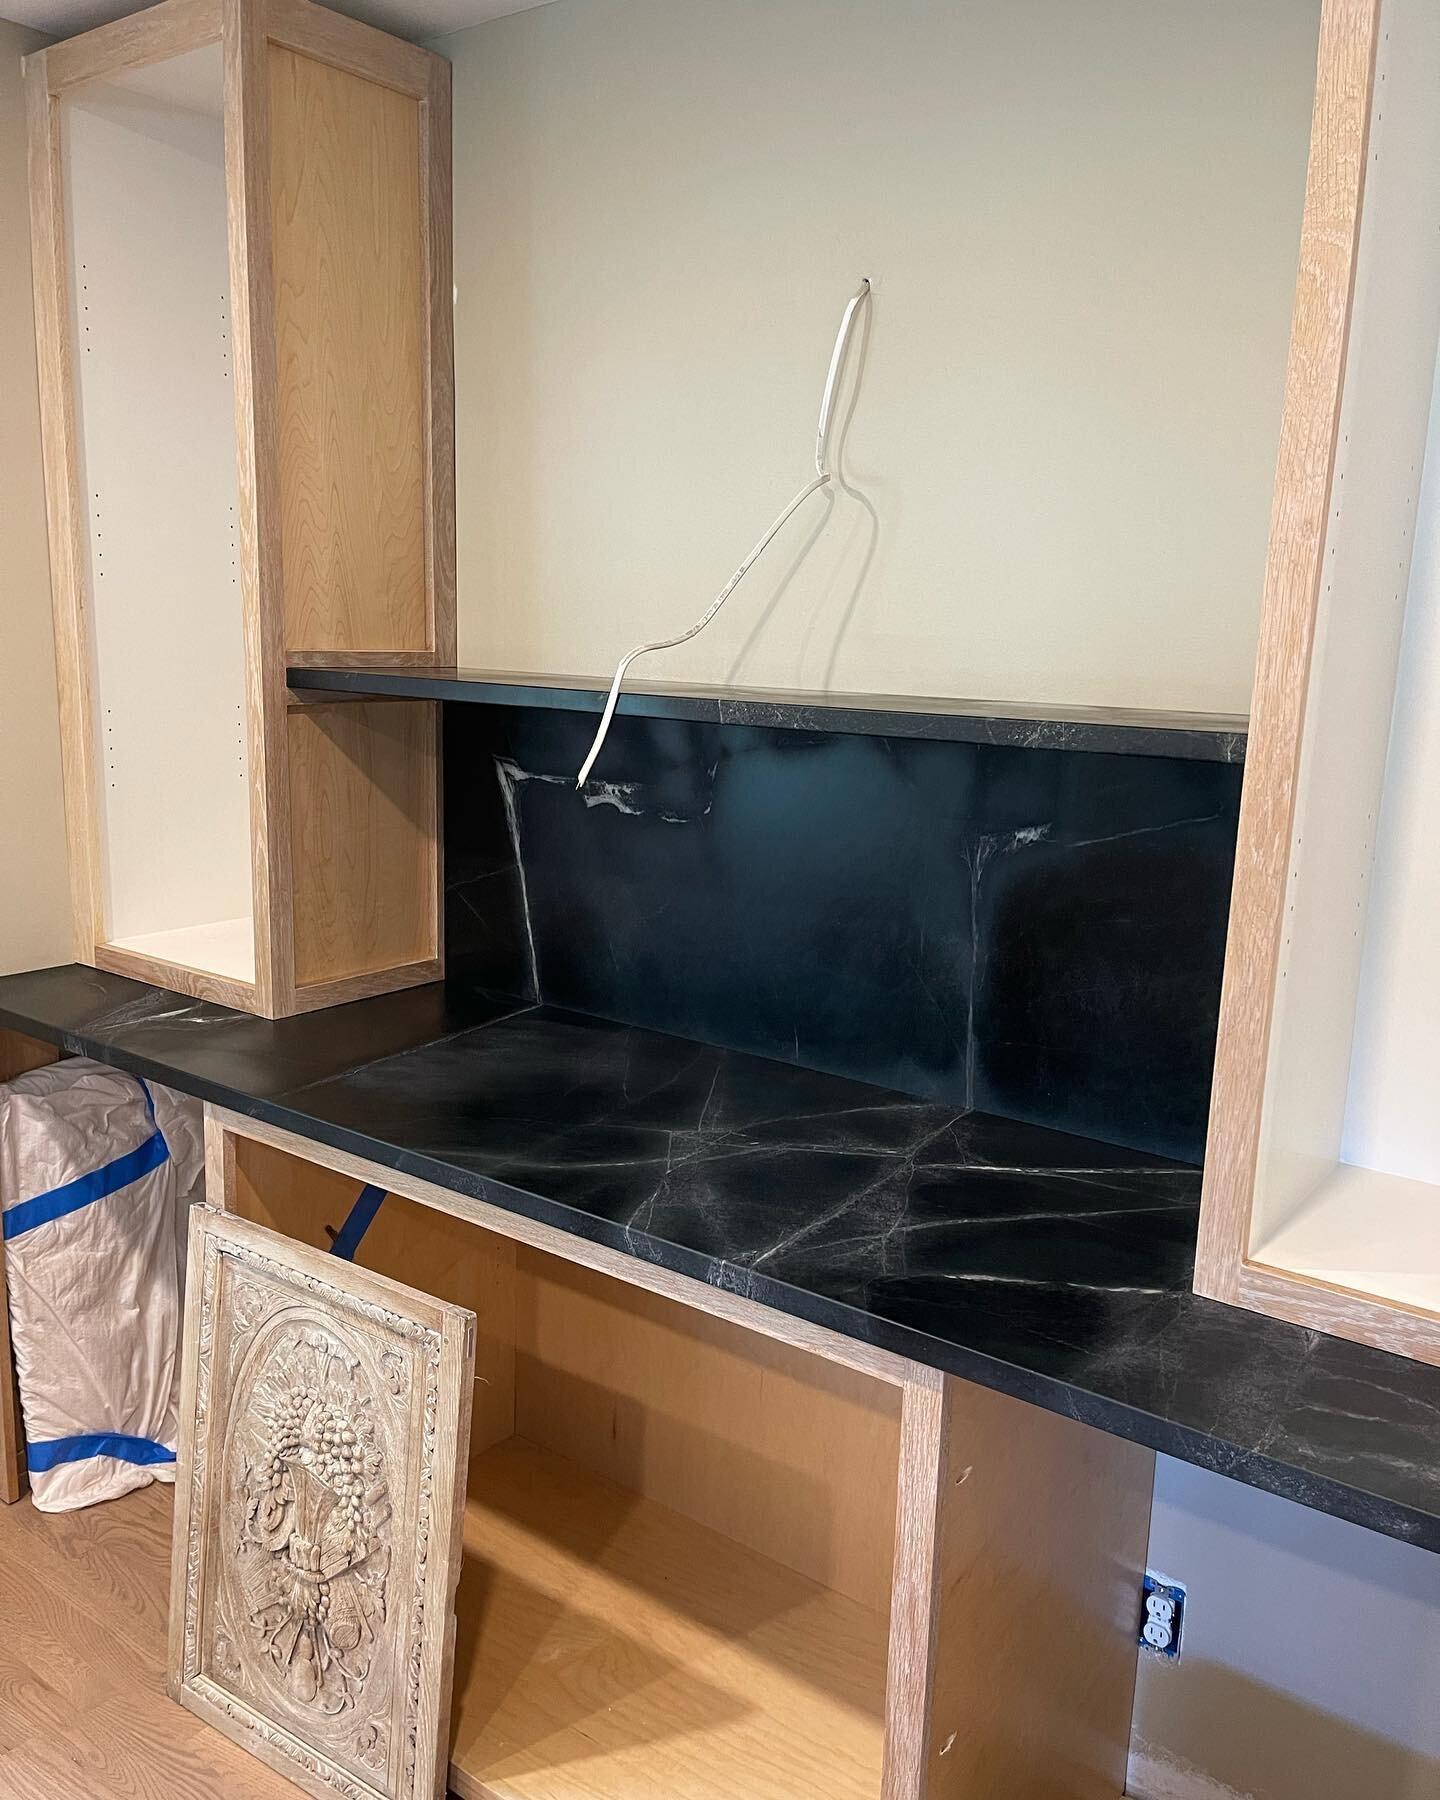 WIP photos for this @roseberryalleninteriordesign project. Love in the details. Check out the custom fit for this soapstone shelf AND the amazing antique panels spotted at market that will be retrofitted as door fronts in this area of the kitchen.  W